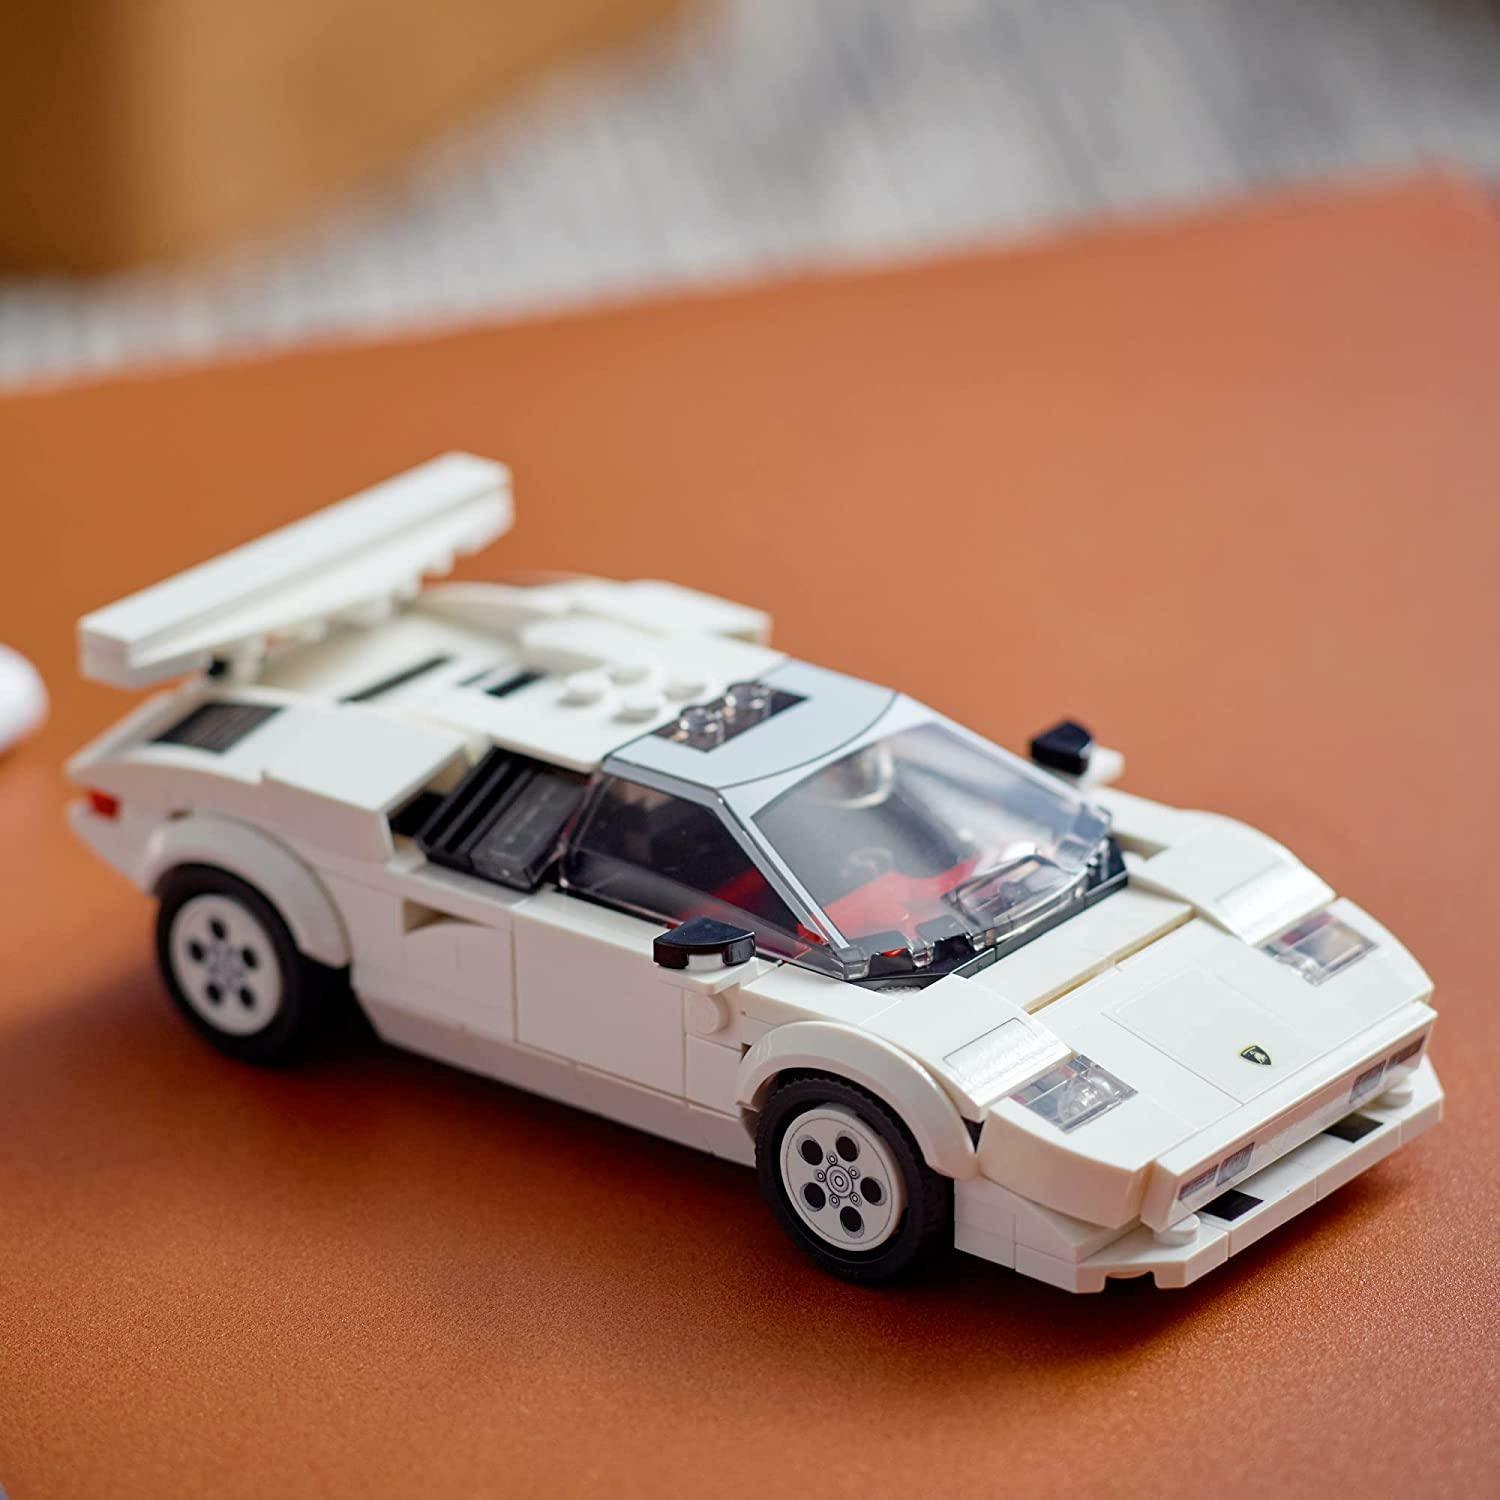 LEGO Speed Champions Lamborghini Countach 76908 Building Kit; Collectible Model of the Iconic 1970’s Super Sports Car - BumbleToys - 8+ Years, 8-13 Years, Boys, Lamborghini, LEGO, OXE, Pre-Order, Speed Champions